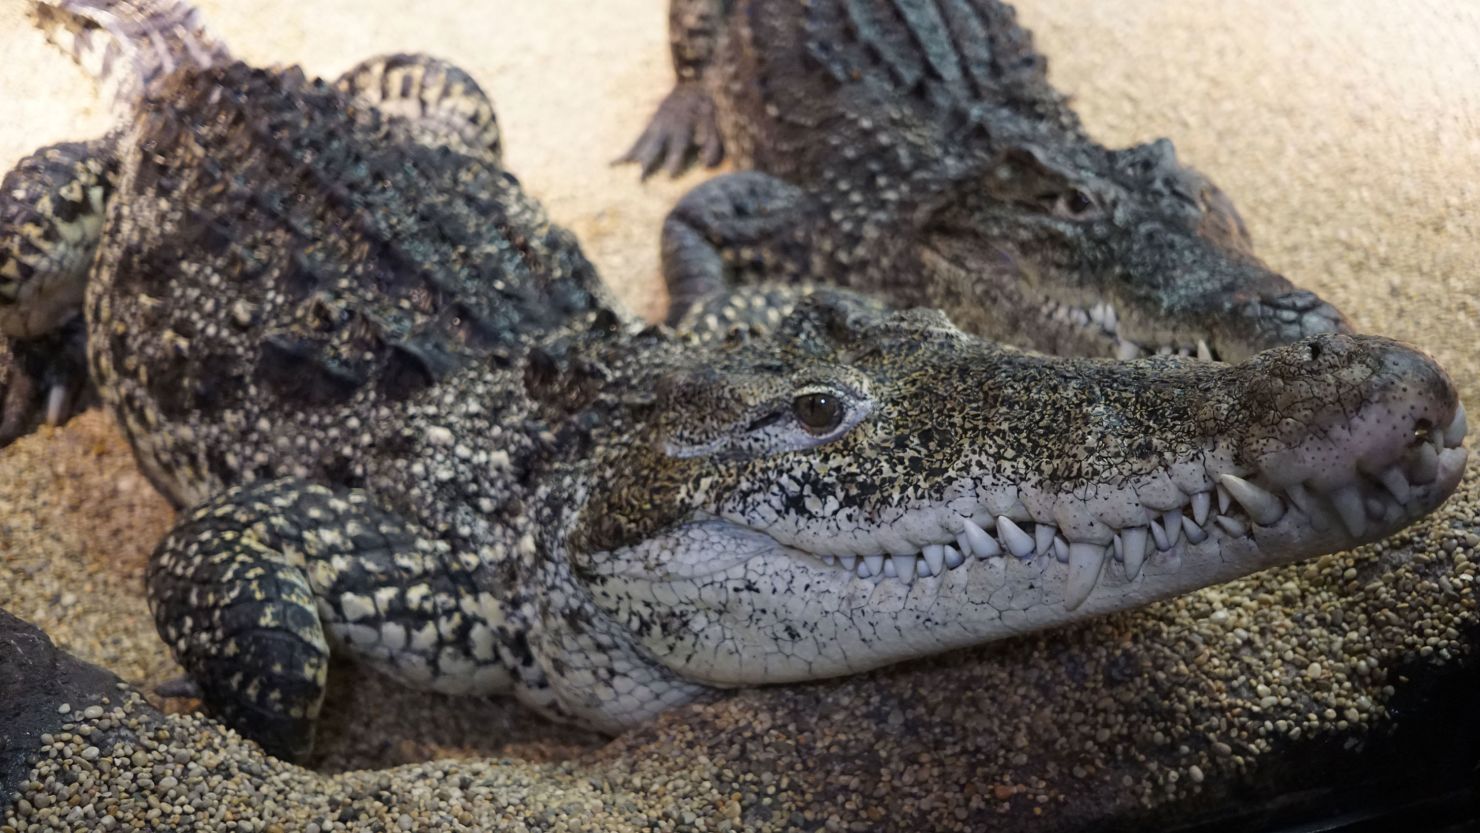 Two adult Cuban crocodiles rest inside their enclosure at the Skansen Aquarium in Stockholm on April 15, 2015. They were given as a gift from Fidel Castro to a Soviet cosmonaut in the 1970s..  